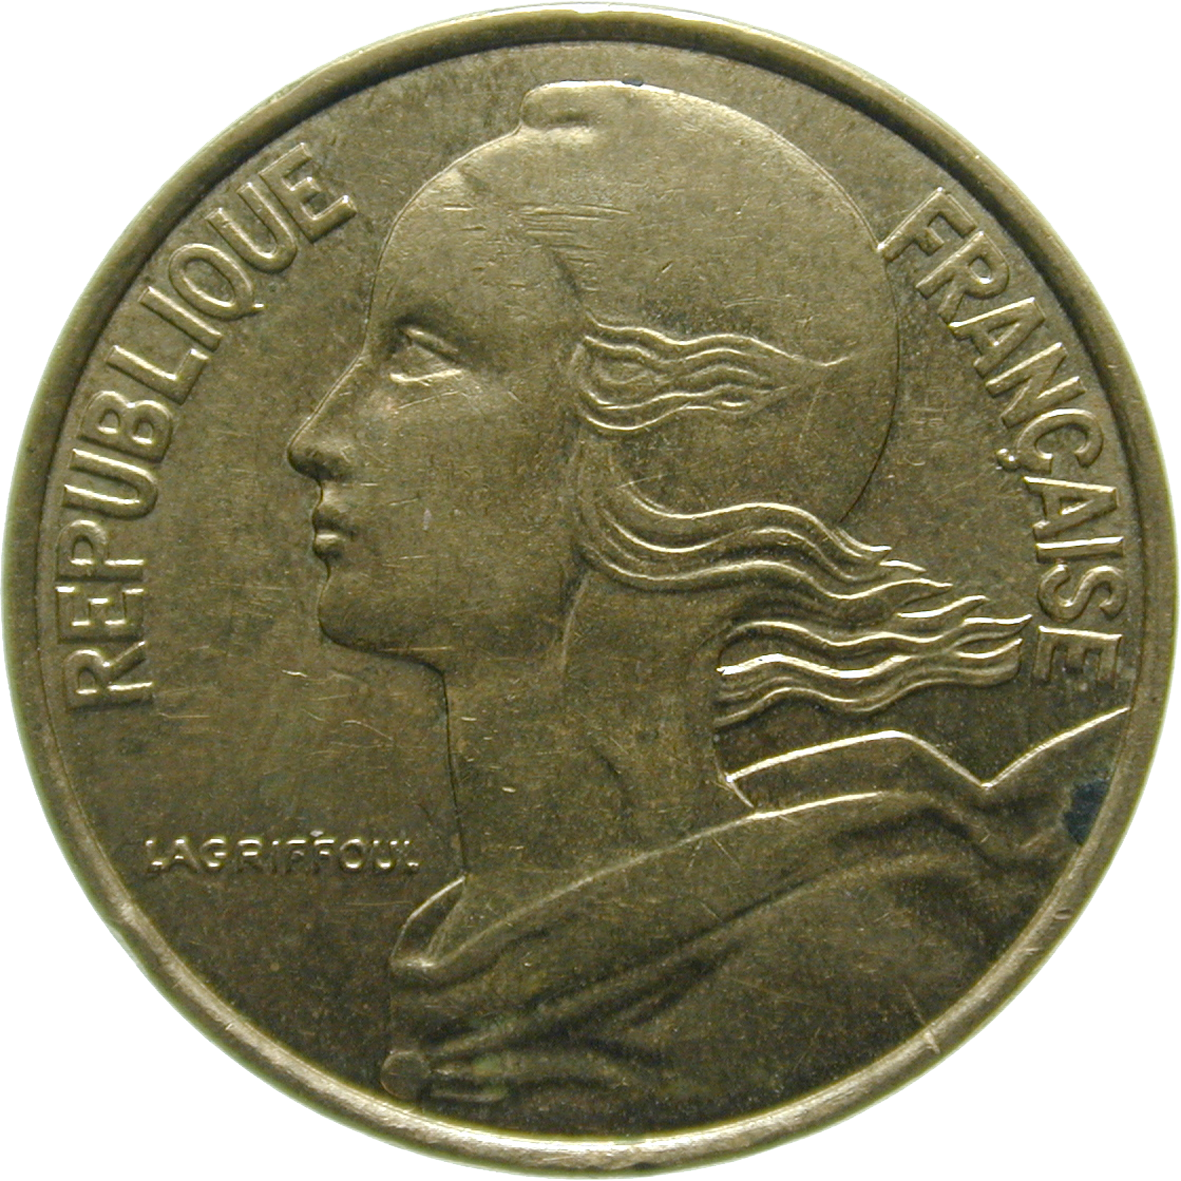 Republic of France, 10 Centimes 1997 (obverse)